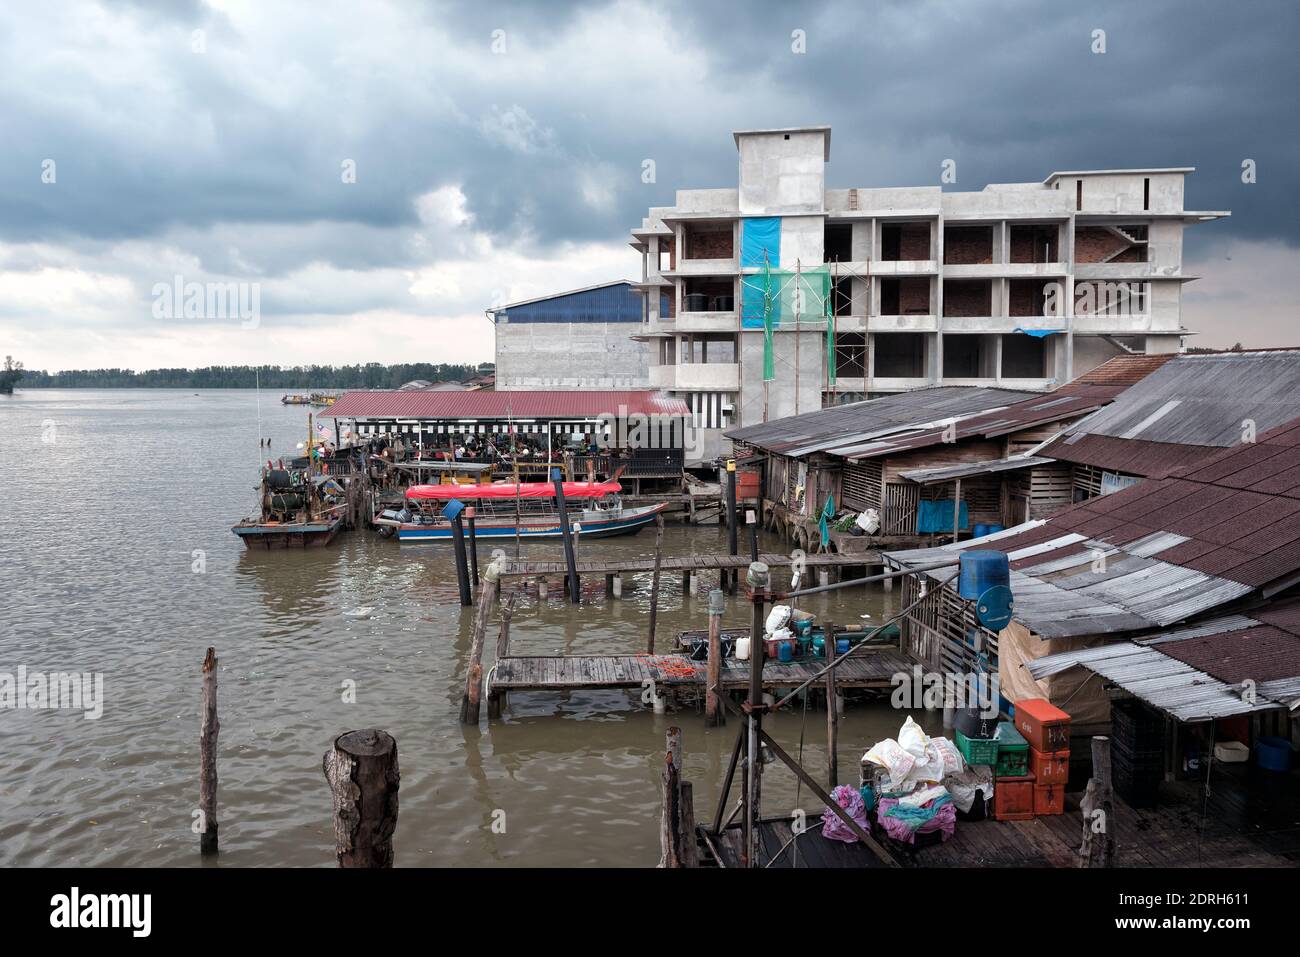 Kuala Sepetang, Malaysia- 27 Oct, 2018: The Kuala Sepetang Jetty with boats, and seafoods restaurant is a famous tourists stop, Perak, Malaysia. - Sce Stock Photo